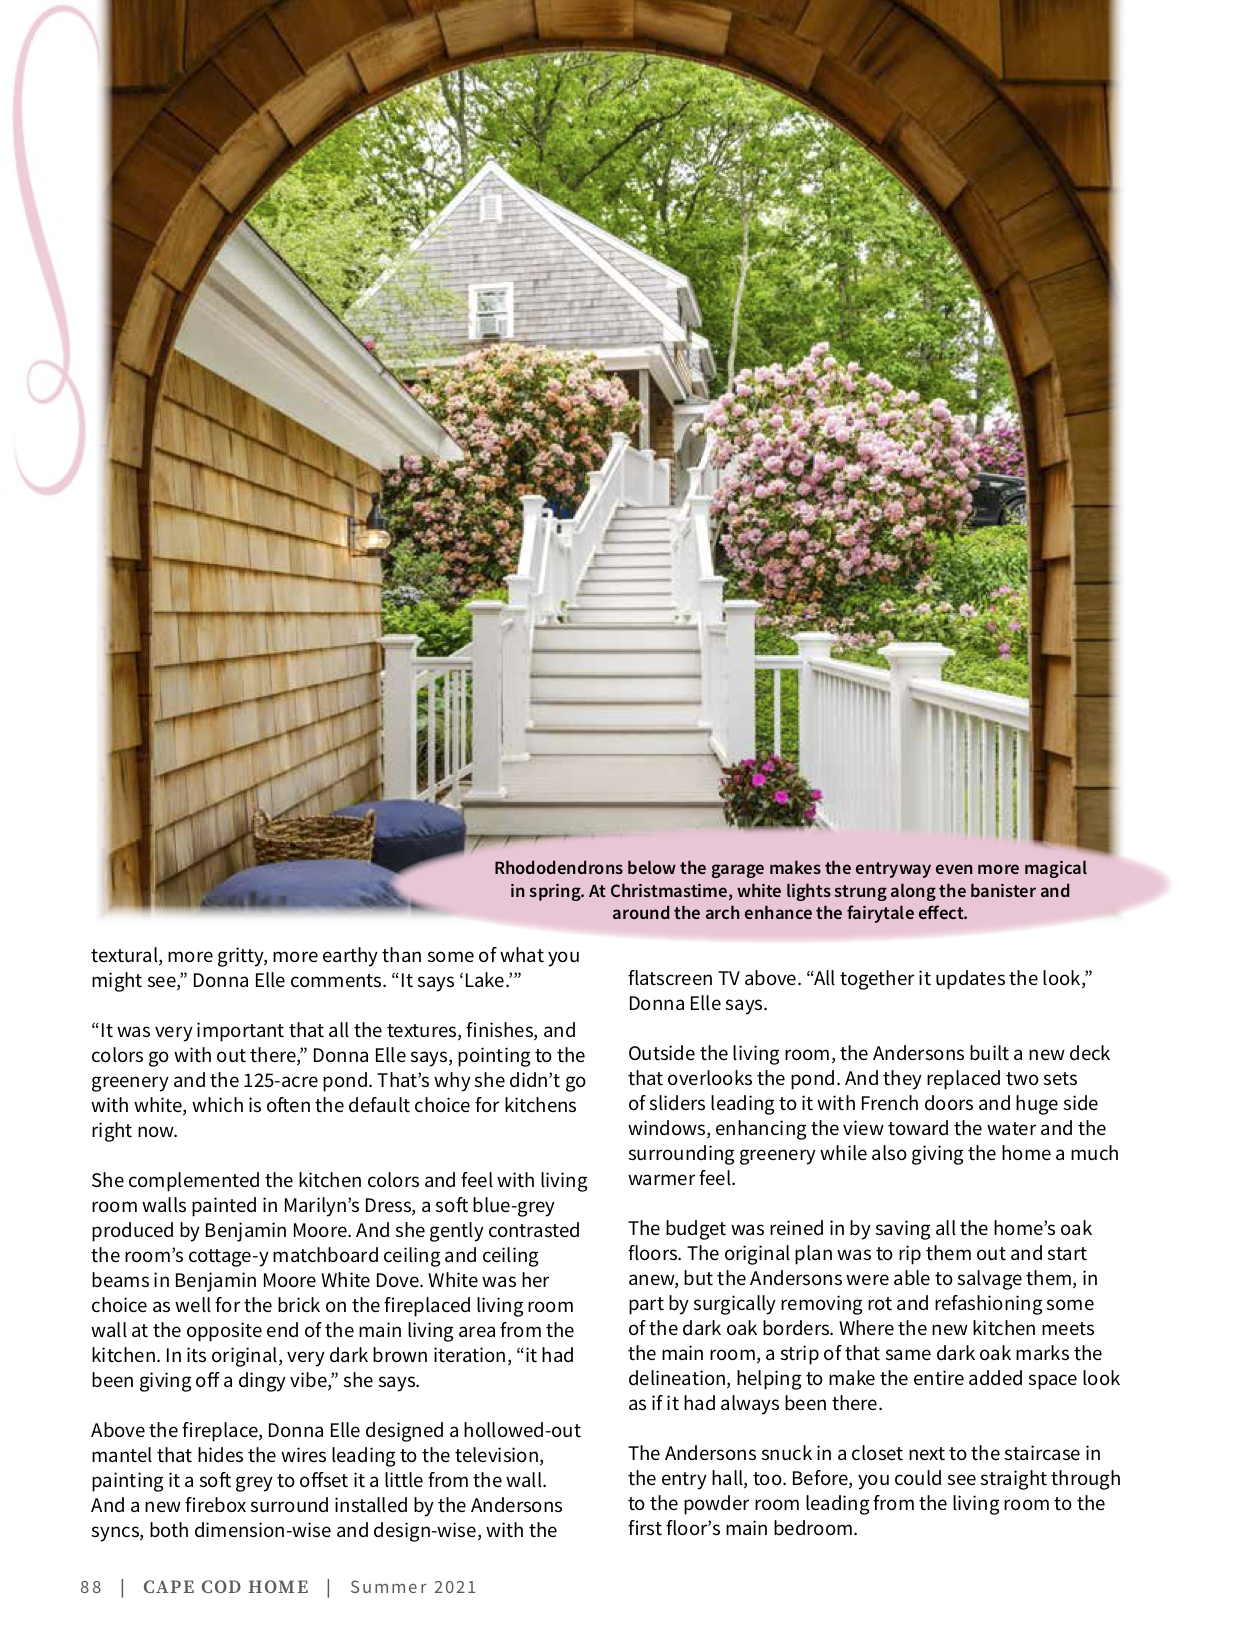 Cape Cod Home Storybook Ending